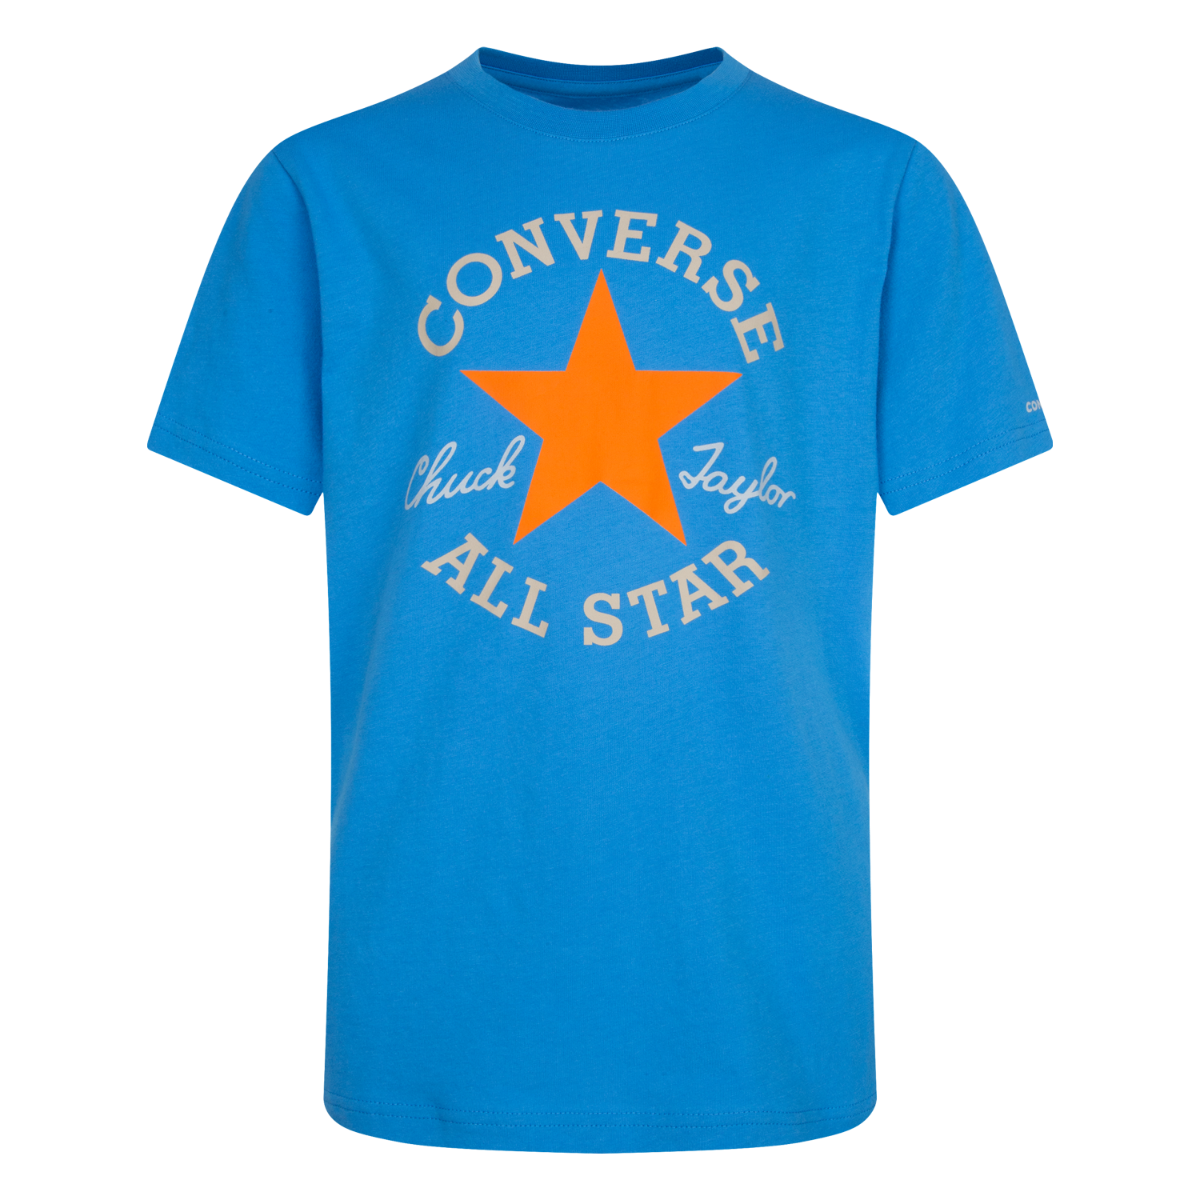 Converse Dissected Chuck Patch Tee | CONVERSE SOUTH AFRICA